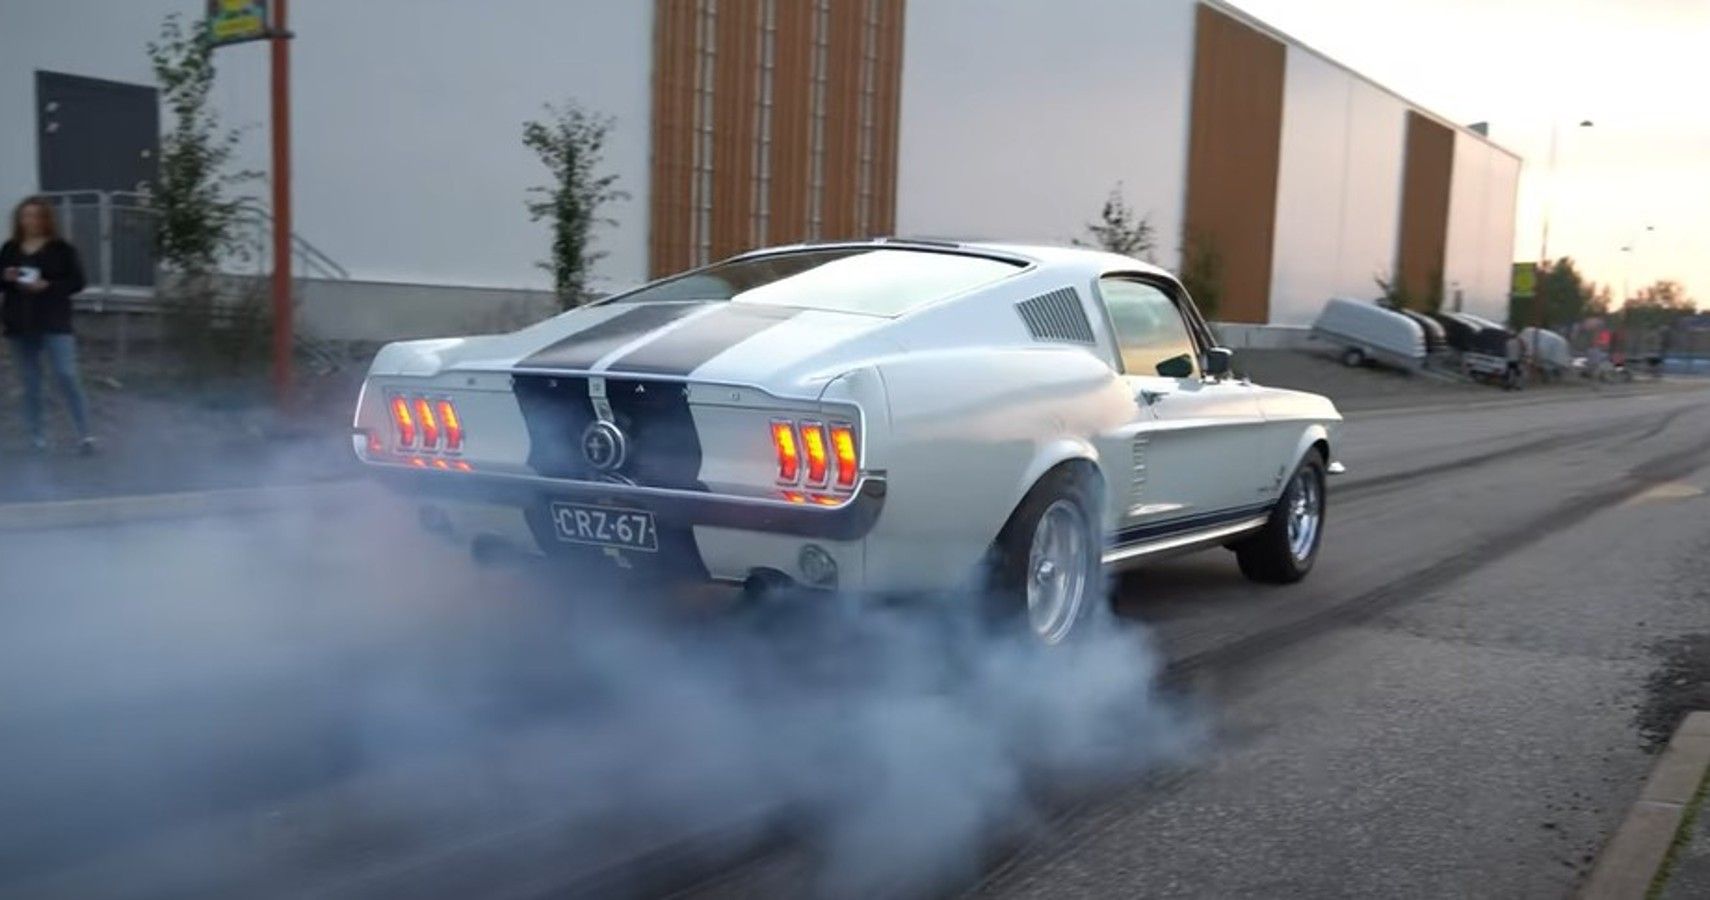 1967 Ford Mustang Fastback peeling out